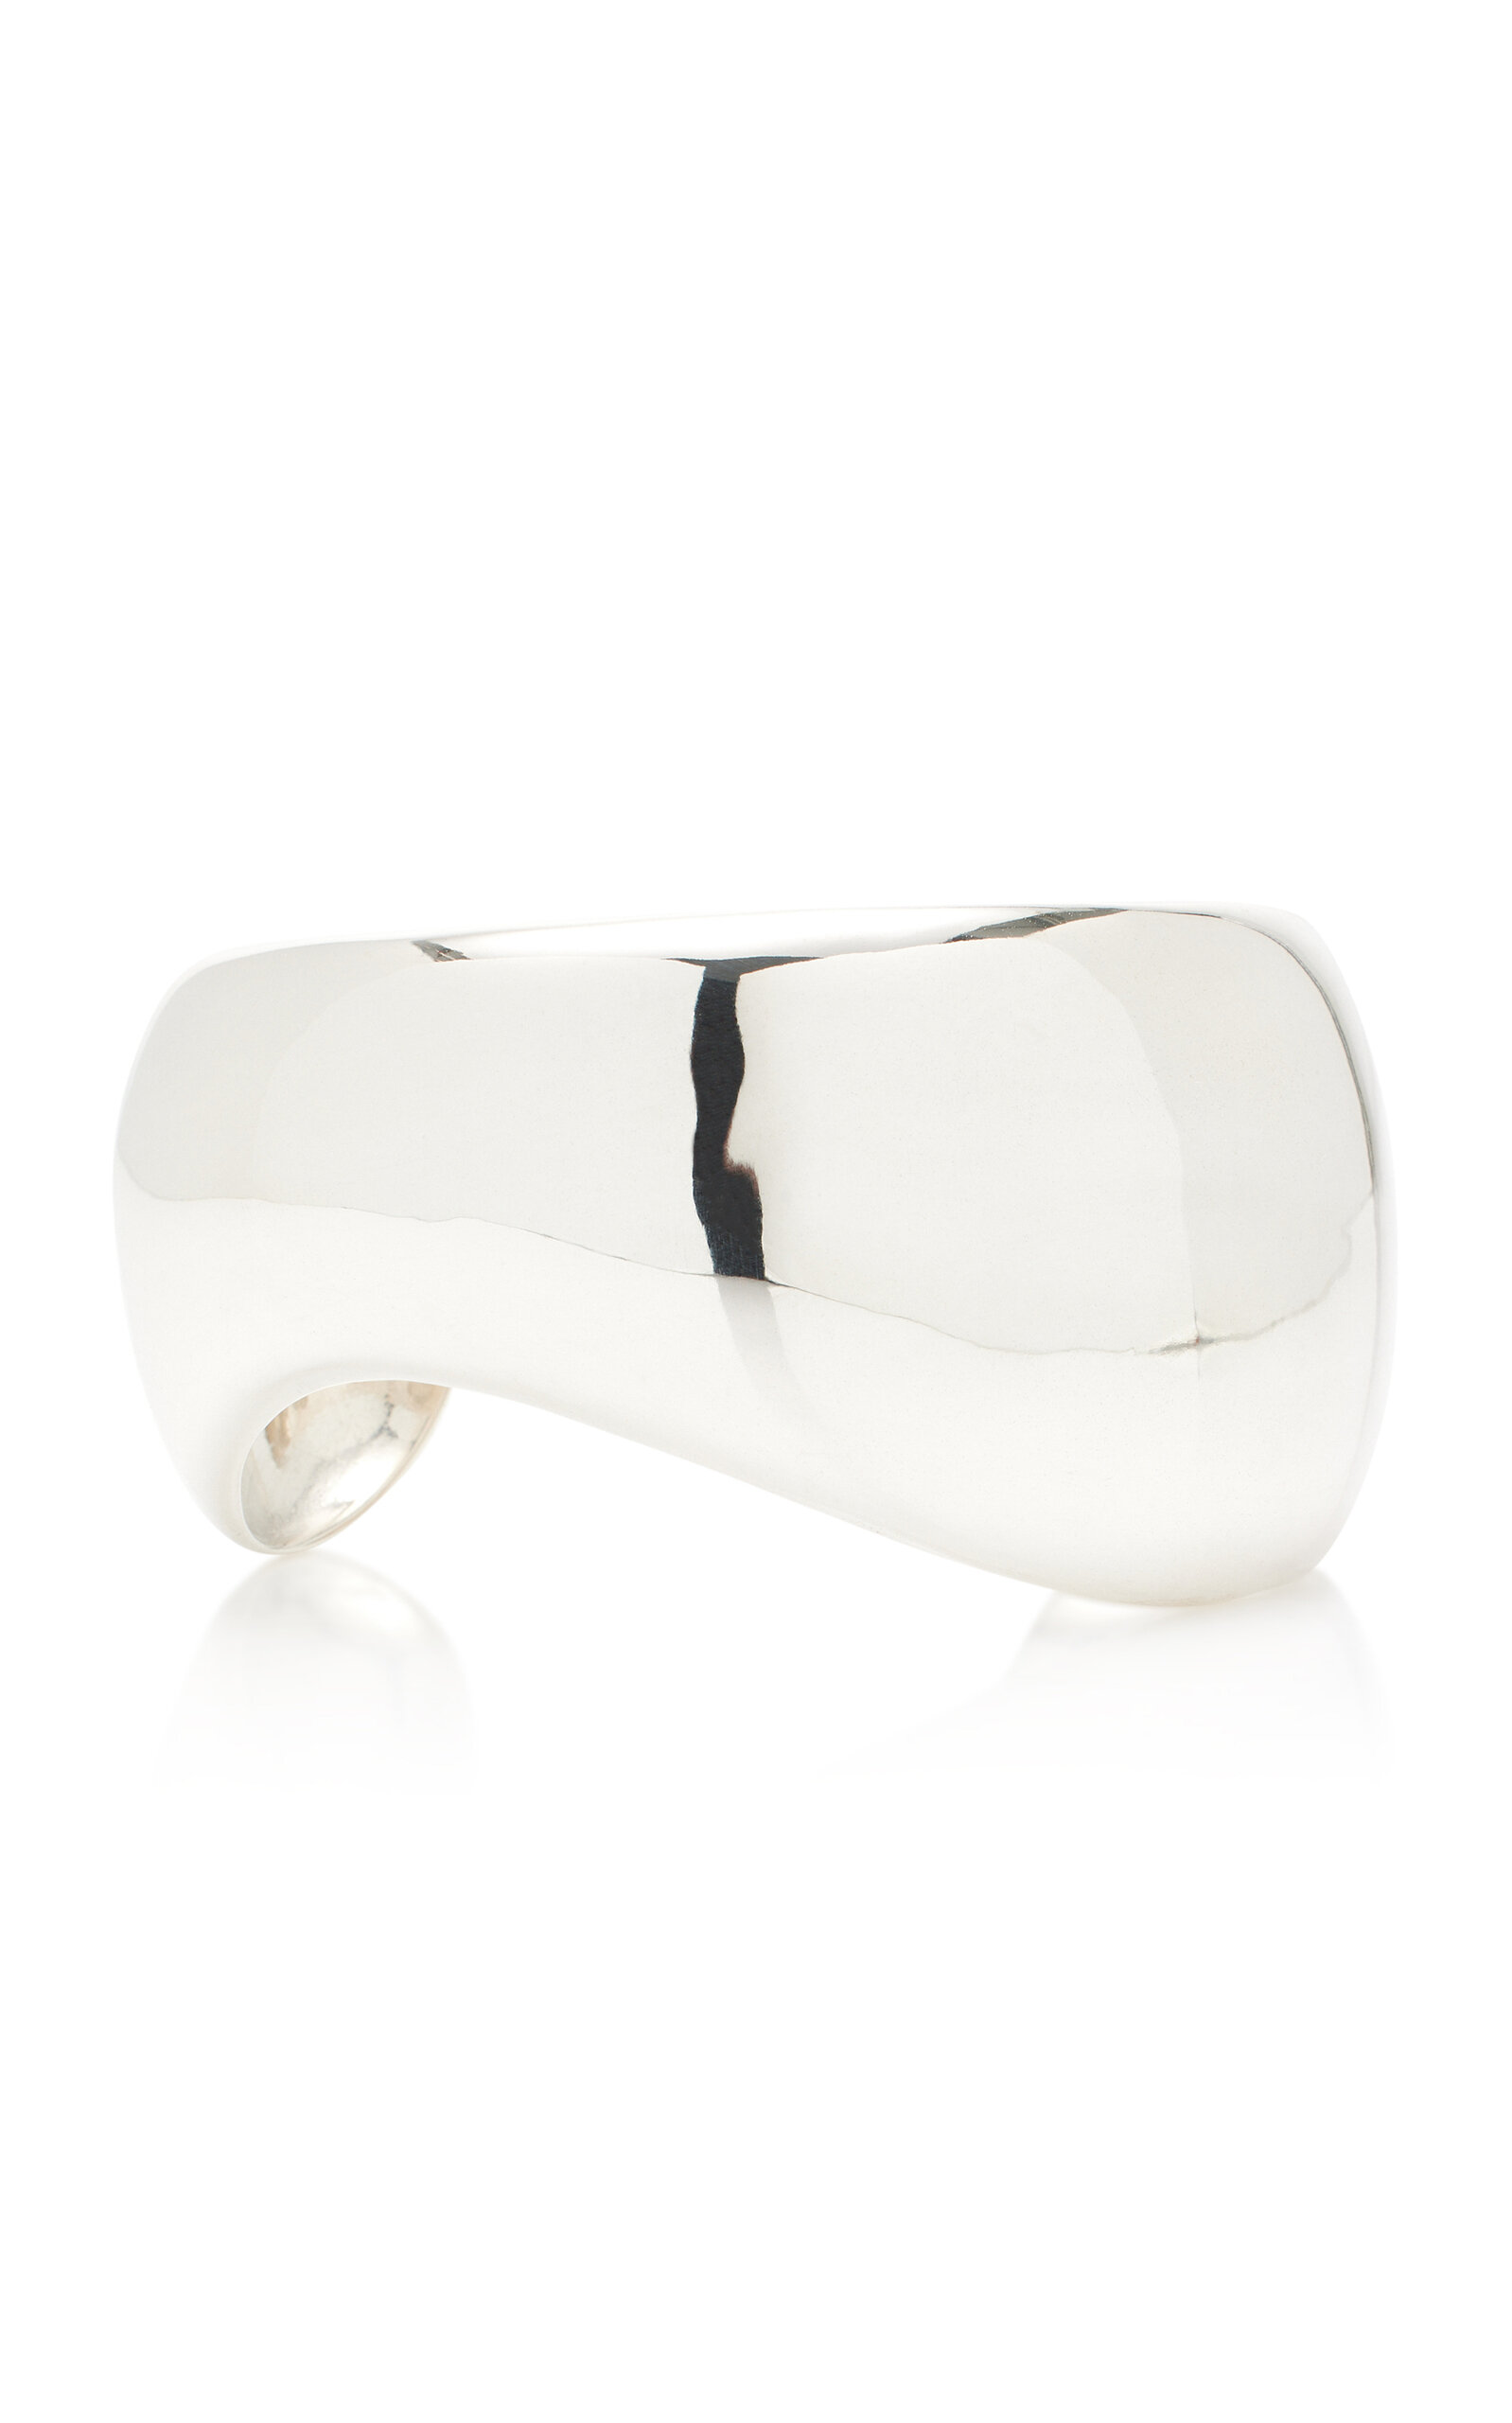 Agmes Jean Sterling Silver Cuff